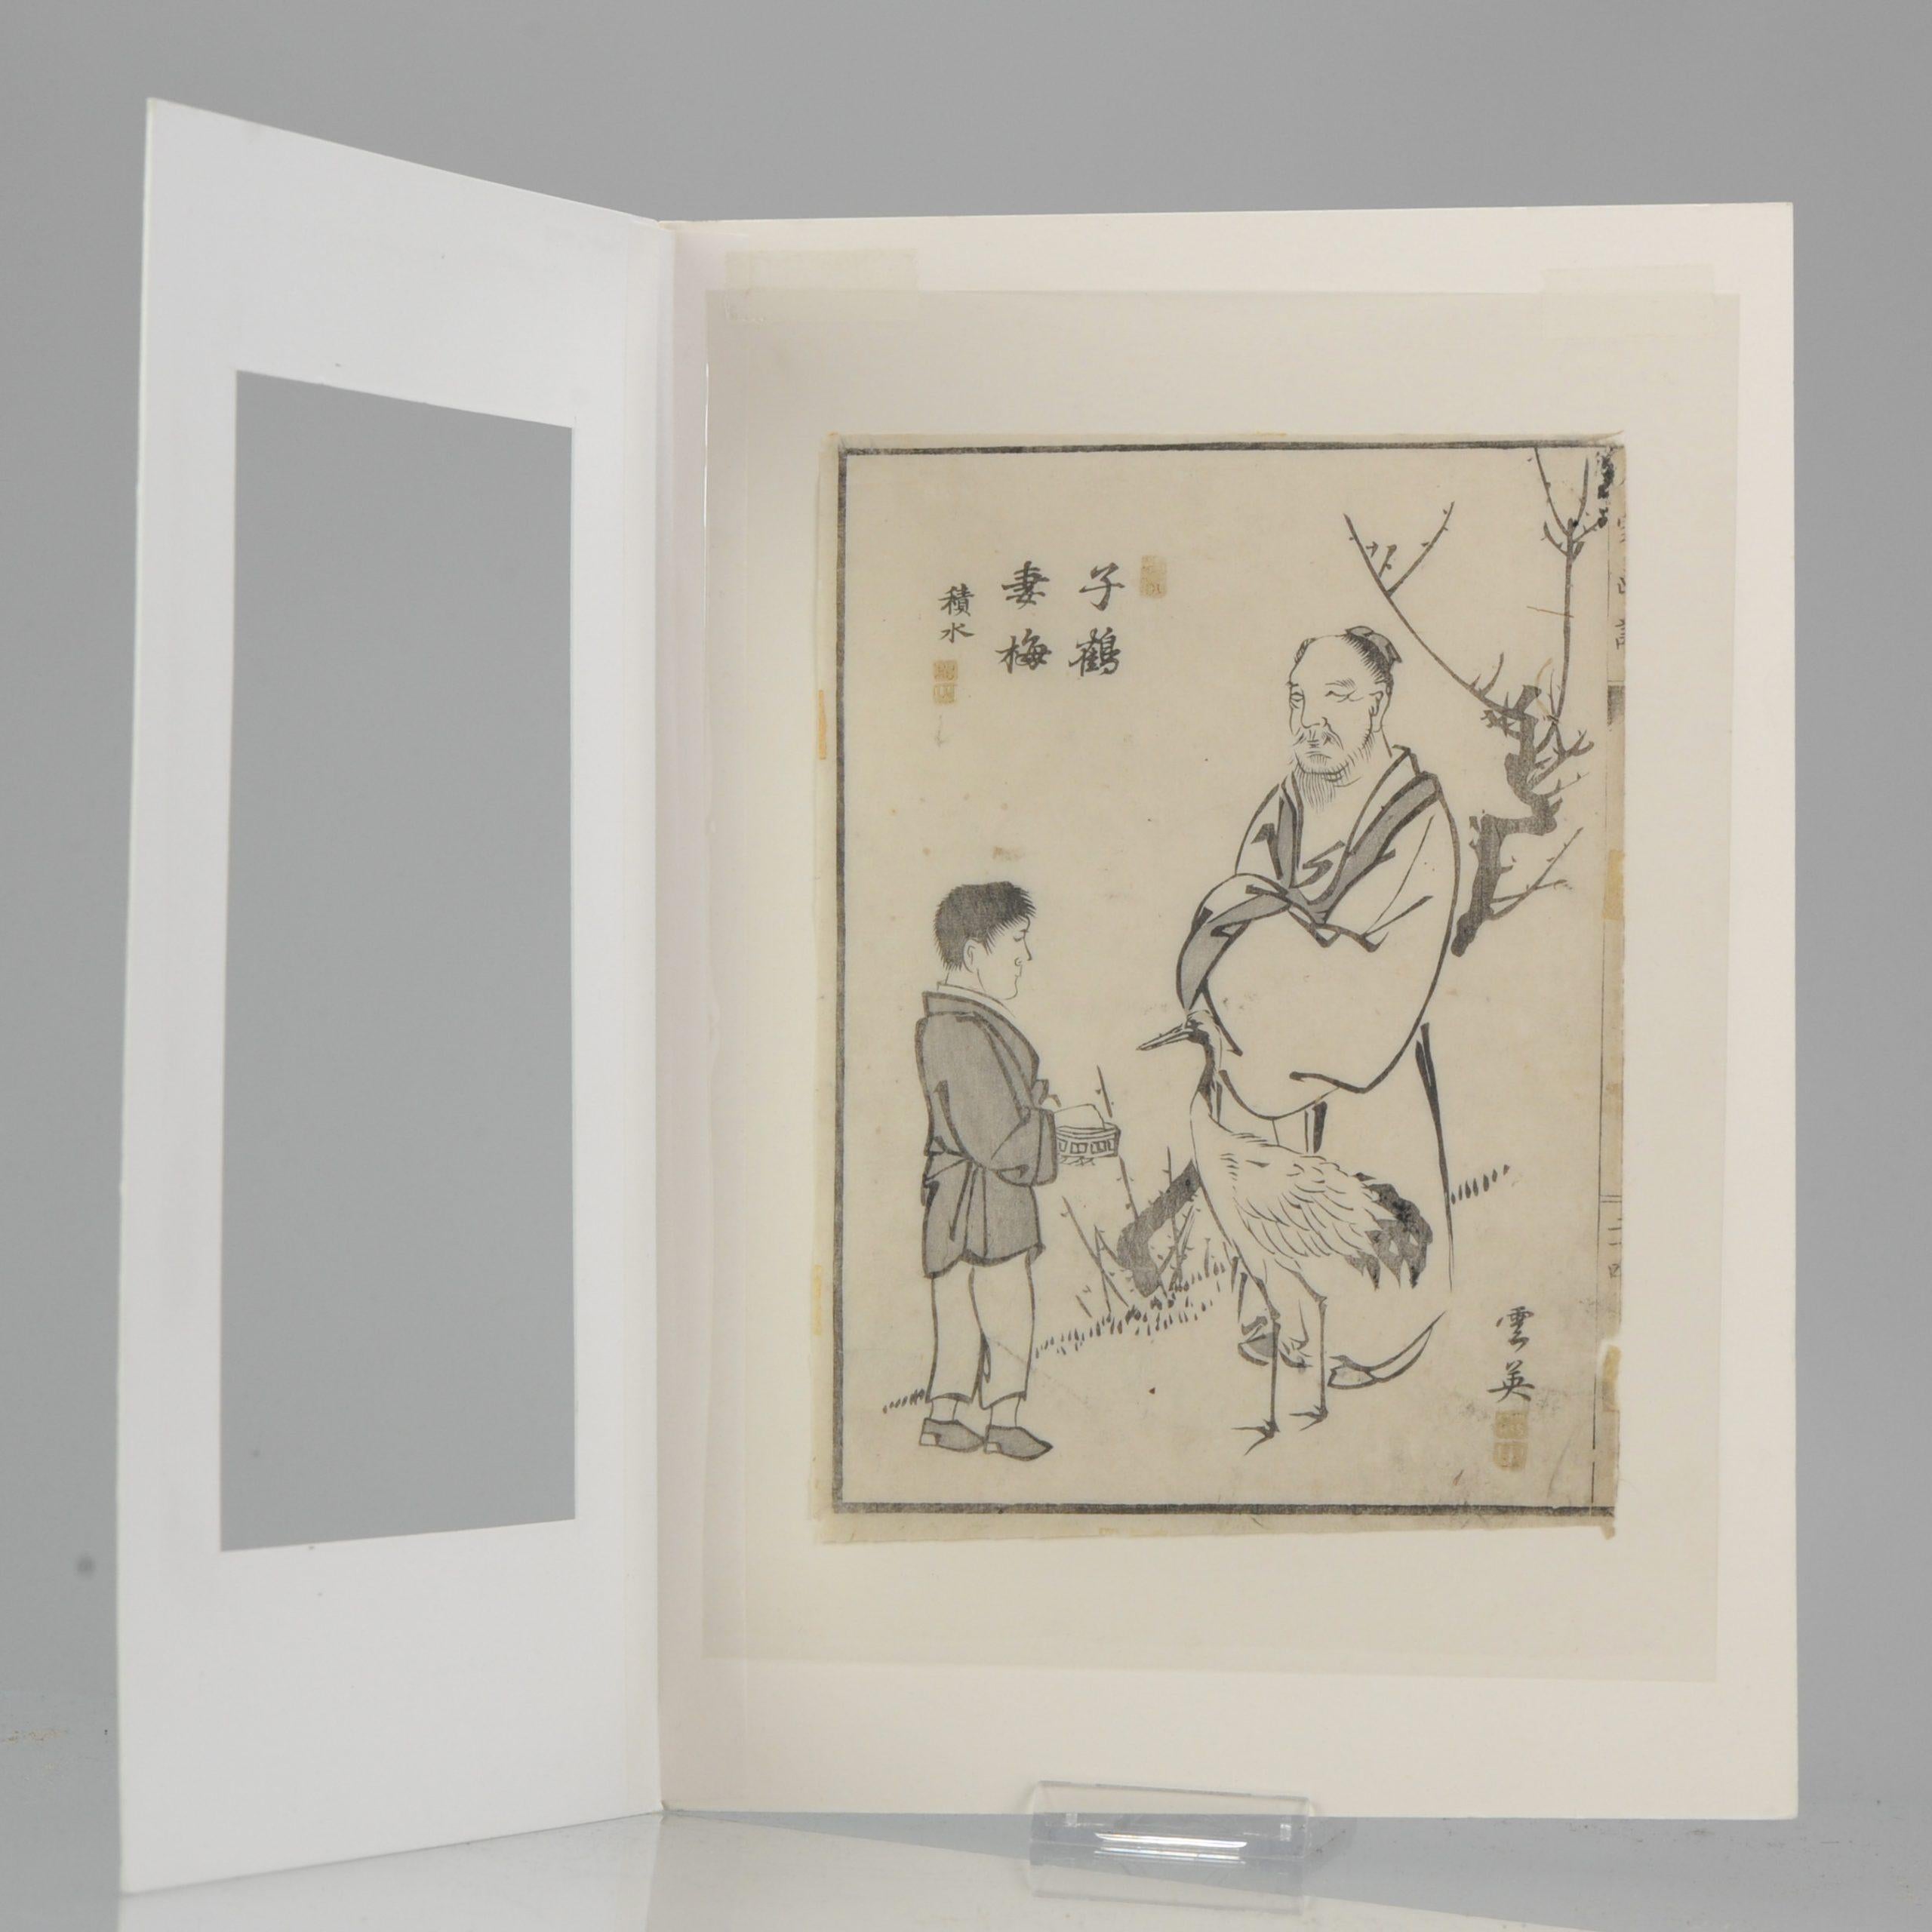 As you can see, it is a ink drawing of the poet Wang Xizhi

Wang Xizhi ( 303–361) was a Chinese calligrapher, writer and politician who lived during the Jin Dynasty (265–420), best known for his mastery of Chinese calligraphy. Wang is sometimes